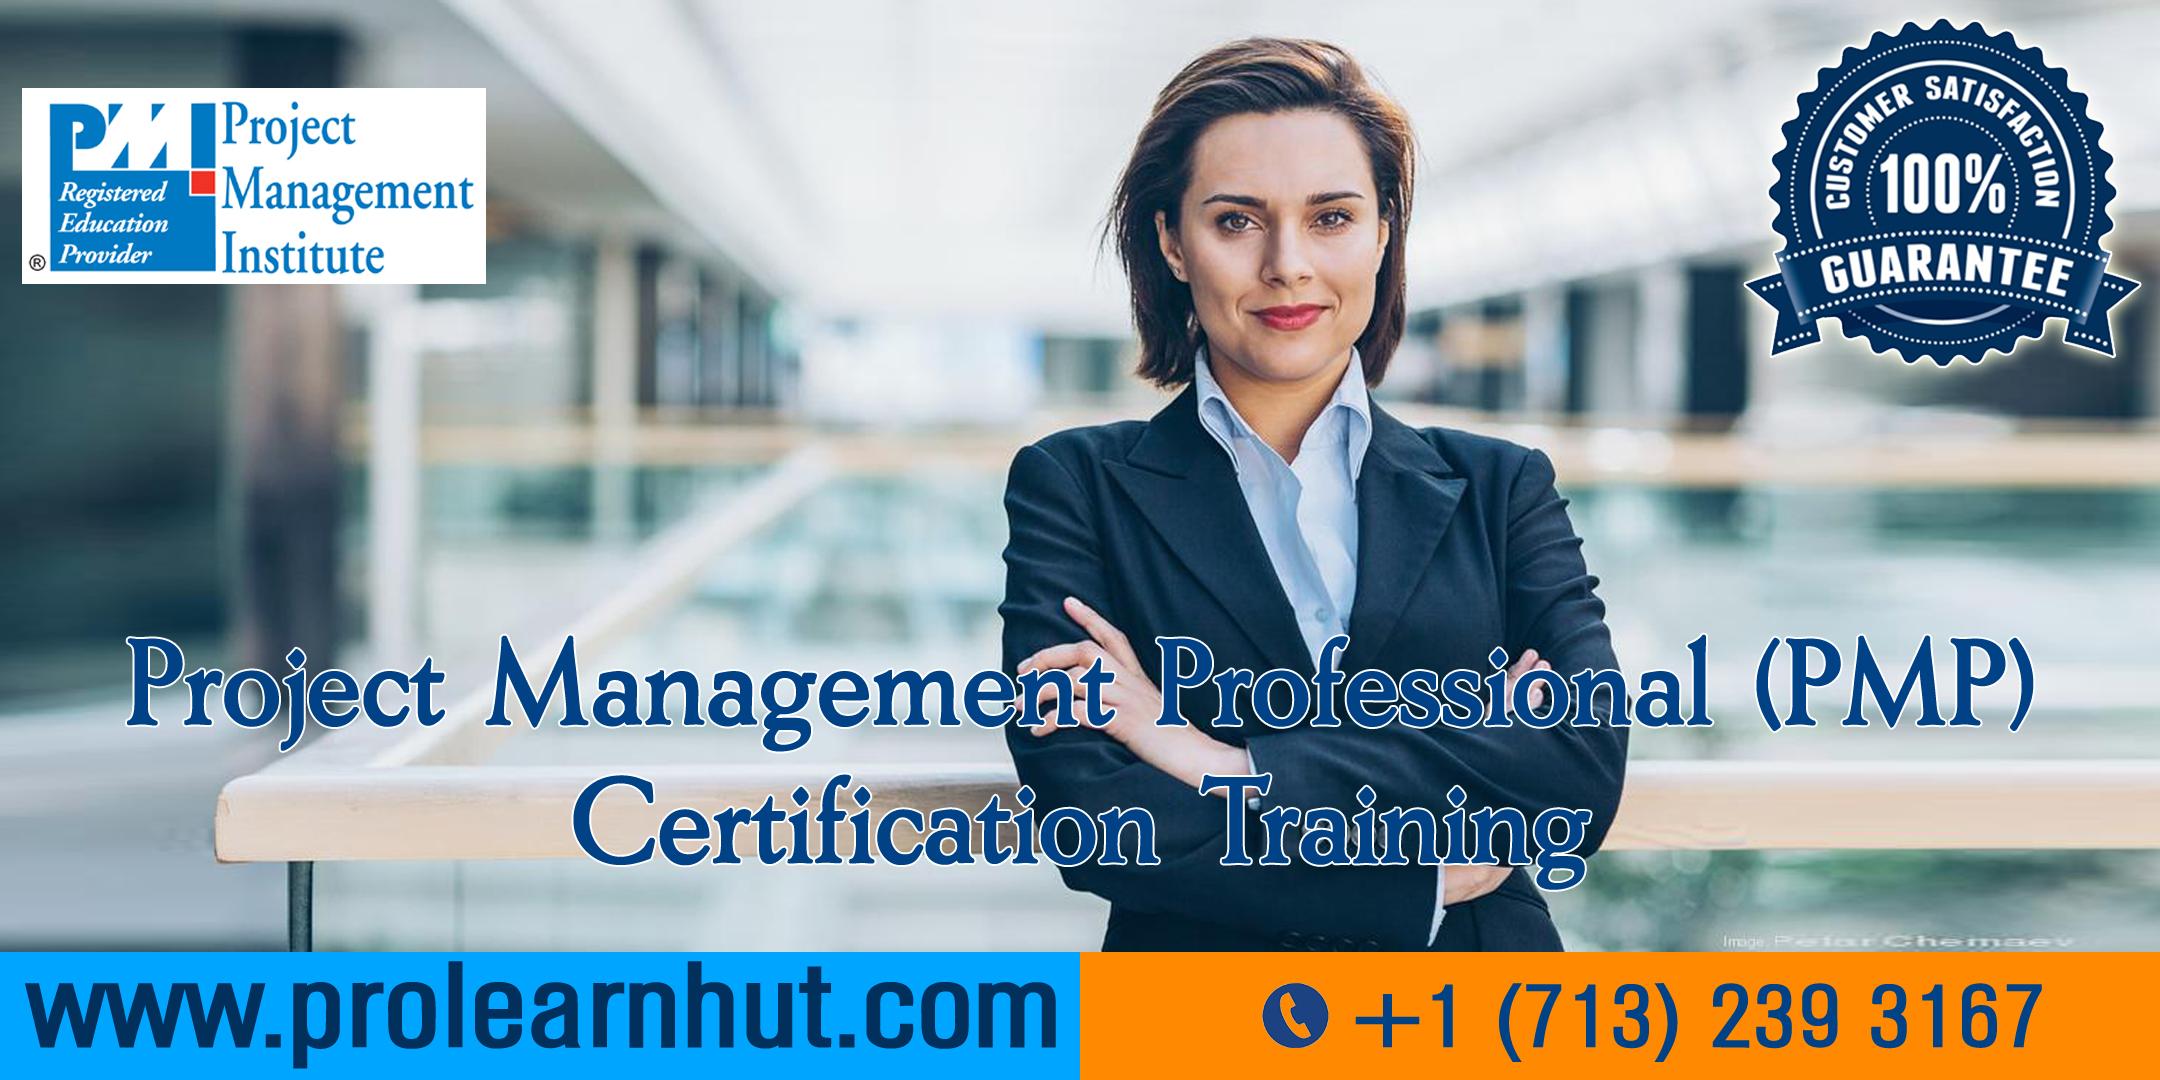 PMP Certification | Project Management Certification| PMP Training in Glendale, CA | ProLearnHut